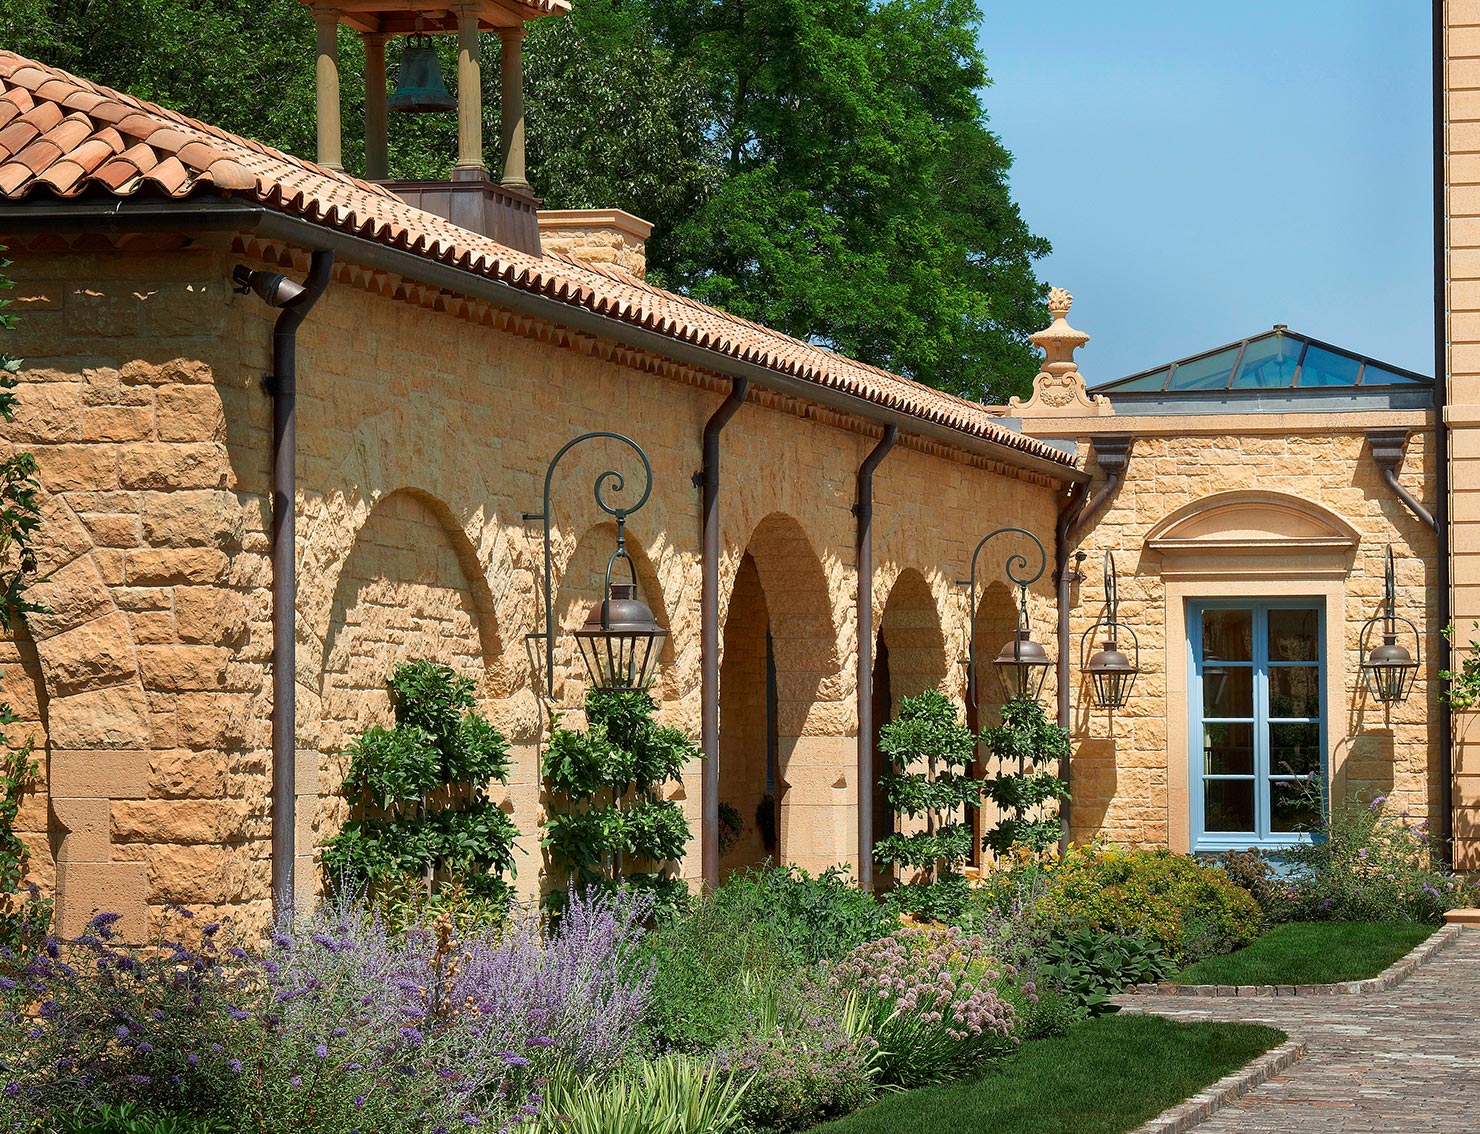 Liederbach & Graham: A Classical Villa in the Manner of the French Riviera Exterior Detail